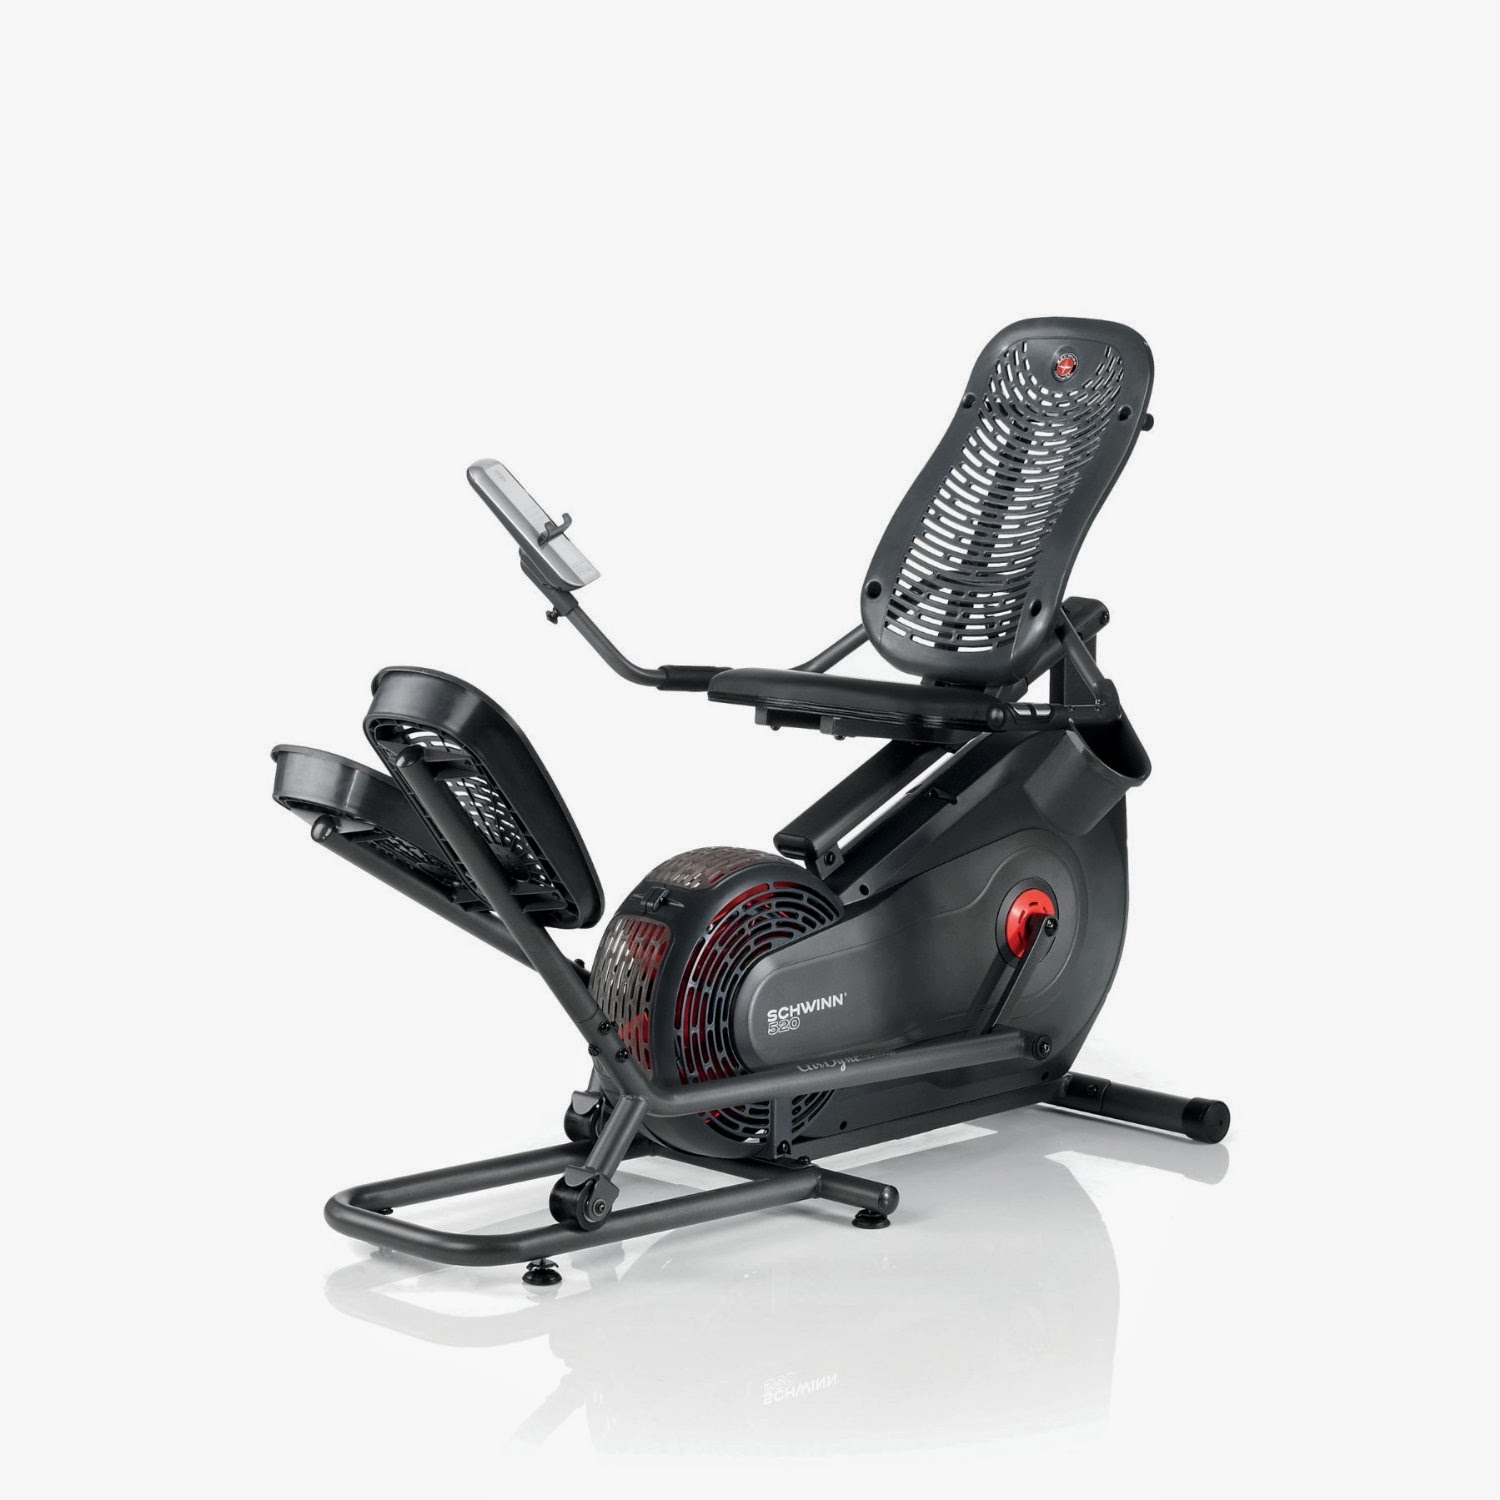 Schwinn 520 Recumbent Elliptical Trainer, review features, back support seat, airdyne fan system for unlimited resistance